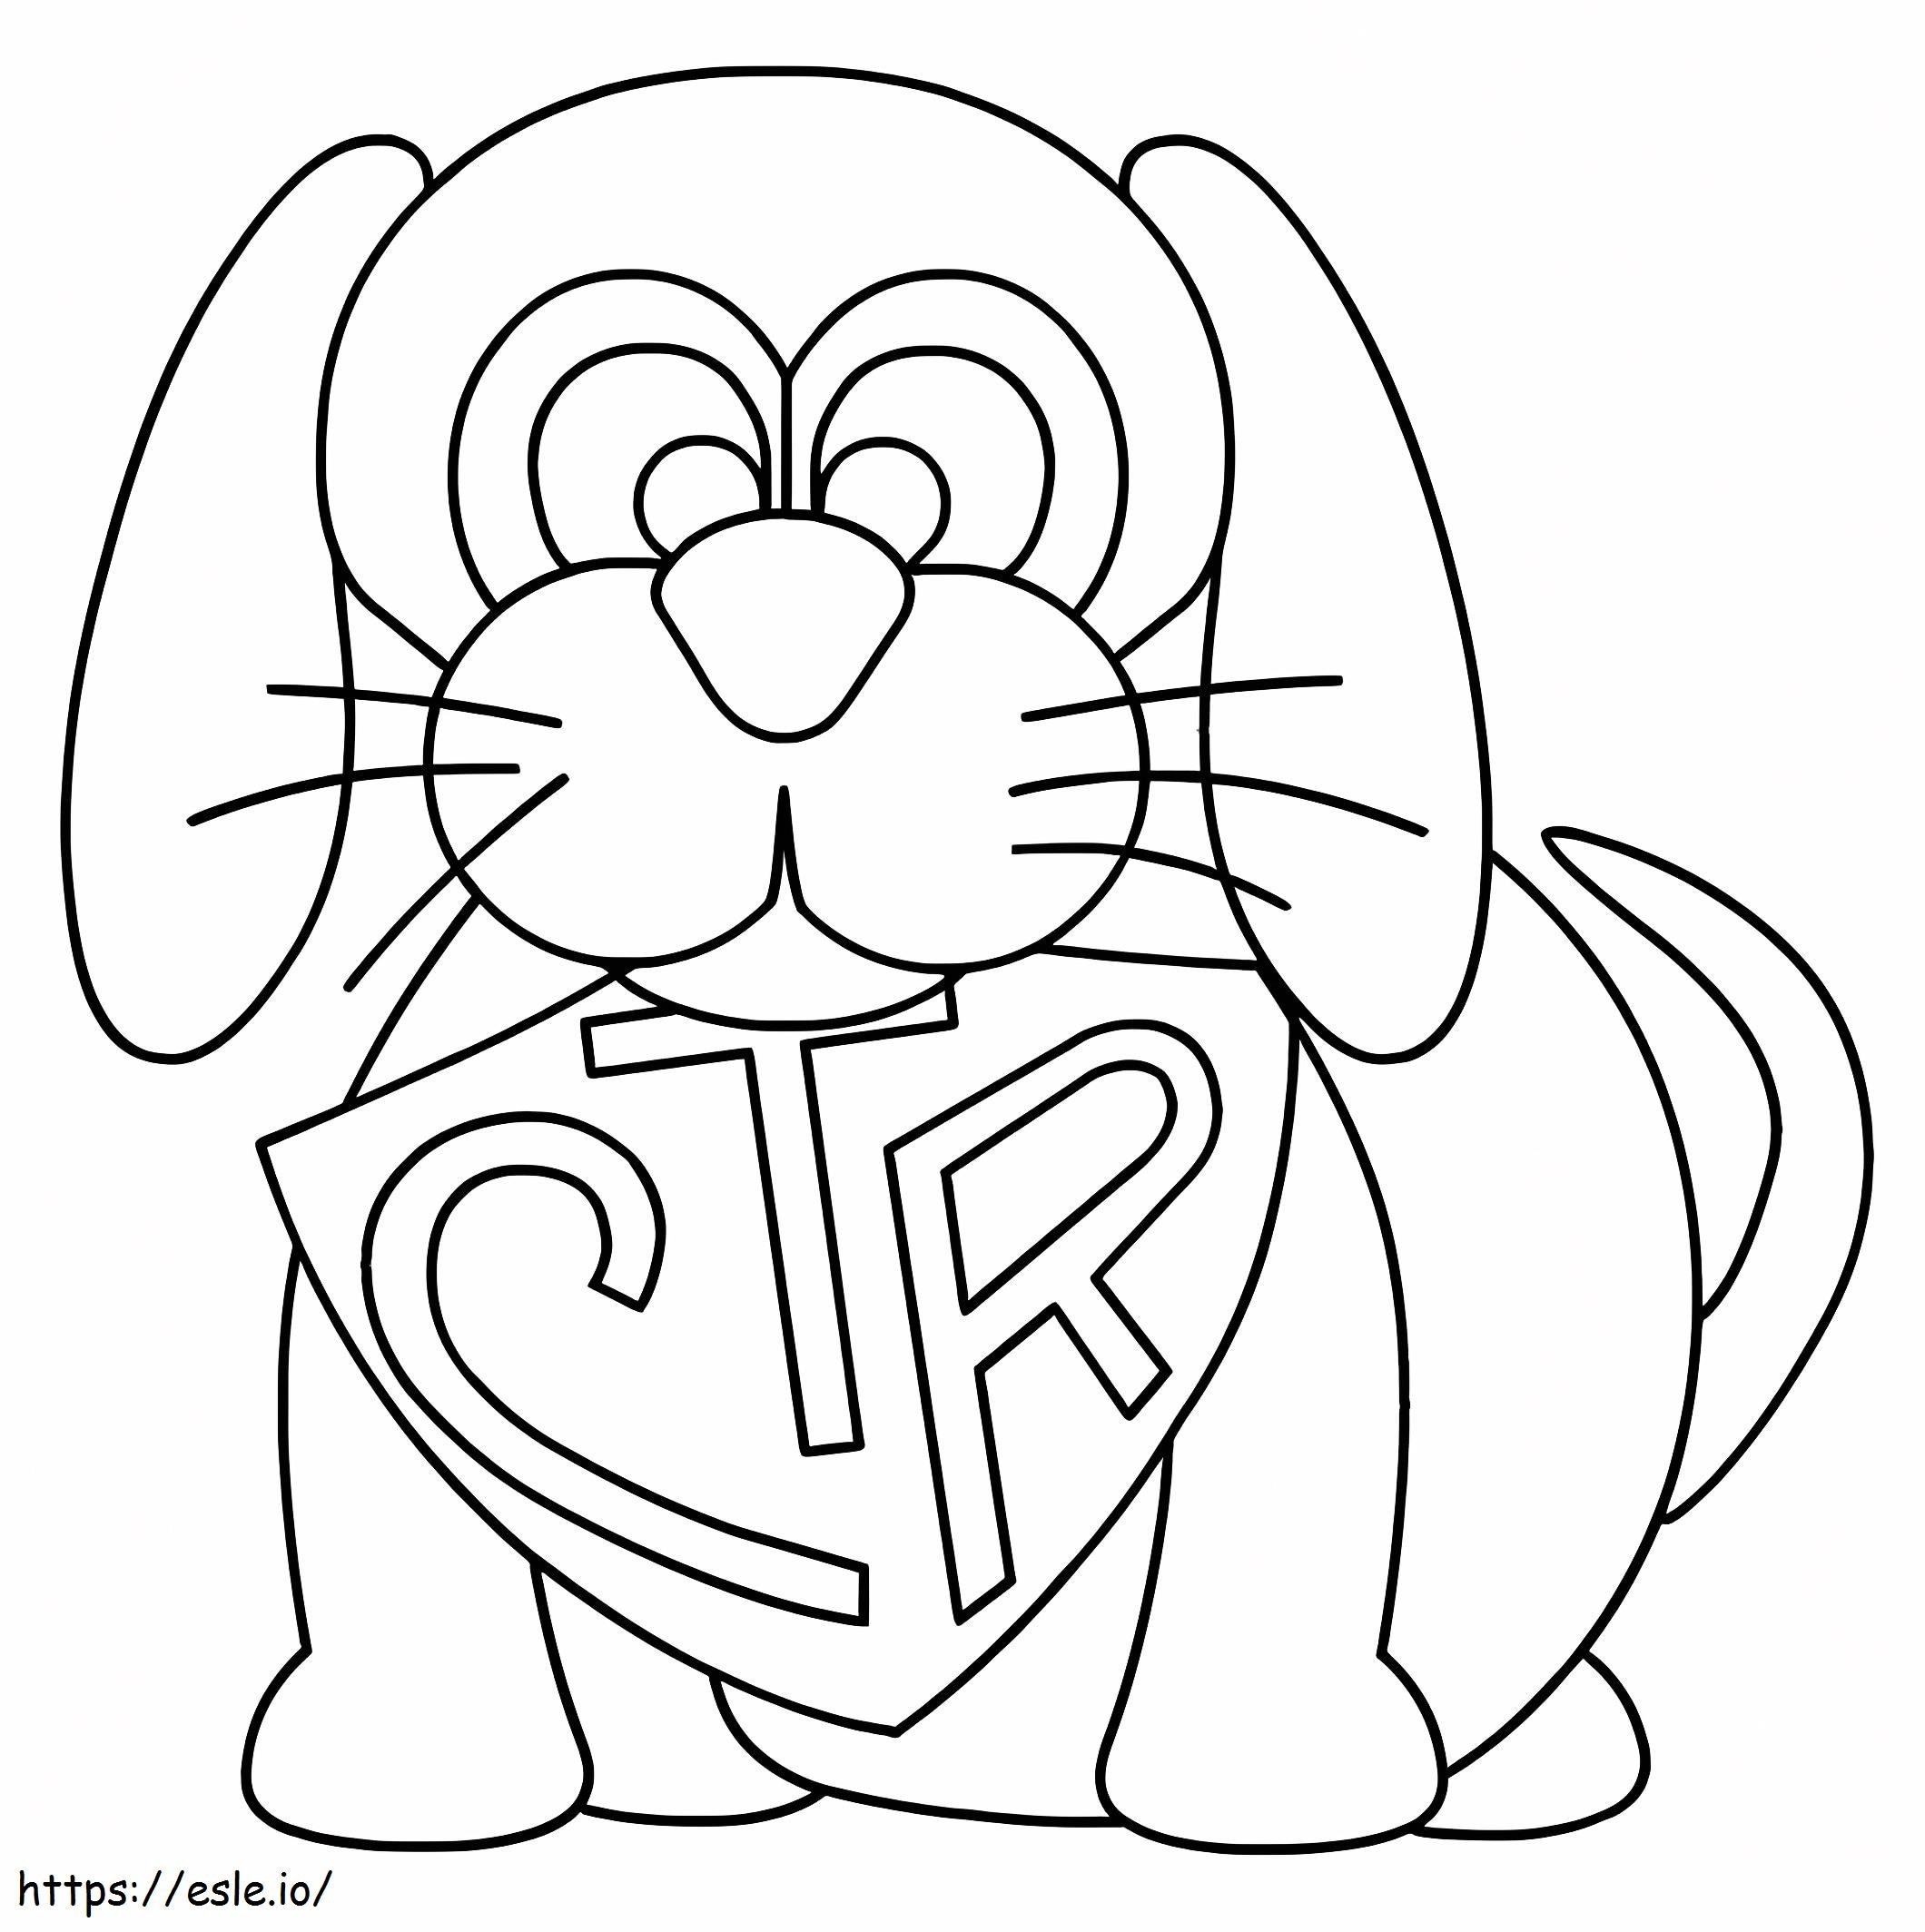 CTR With Dog coloring page